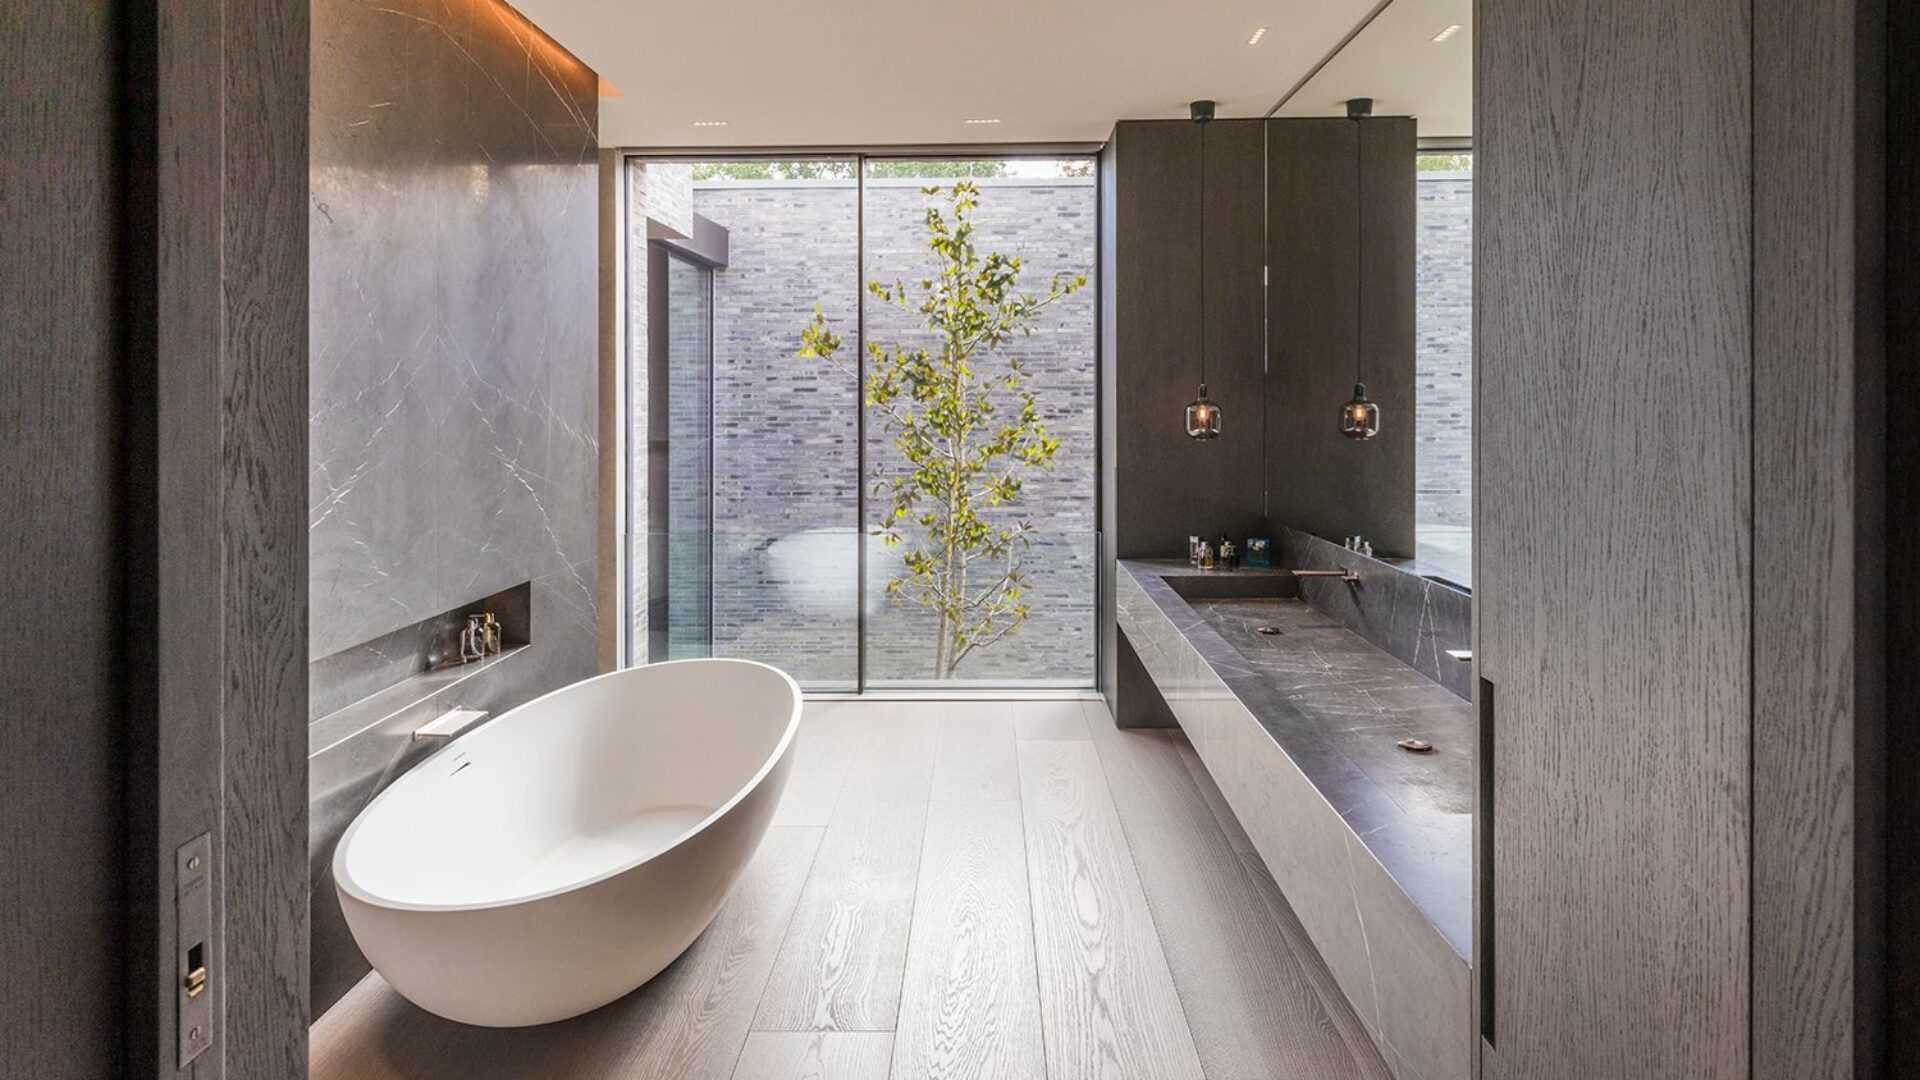 In this modern bathroom, a freestanding bathtub sits beside a shelving niche, while the windows provide a view of the grey brickwork.